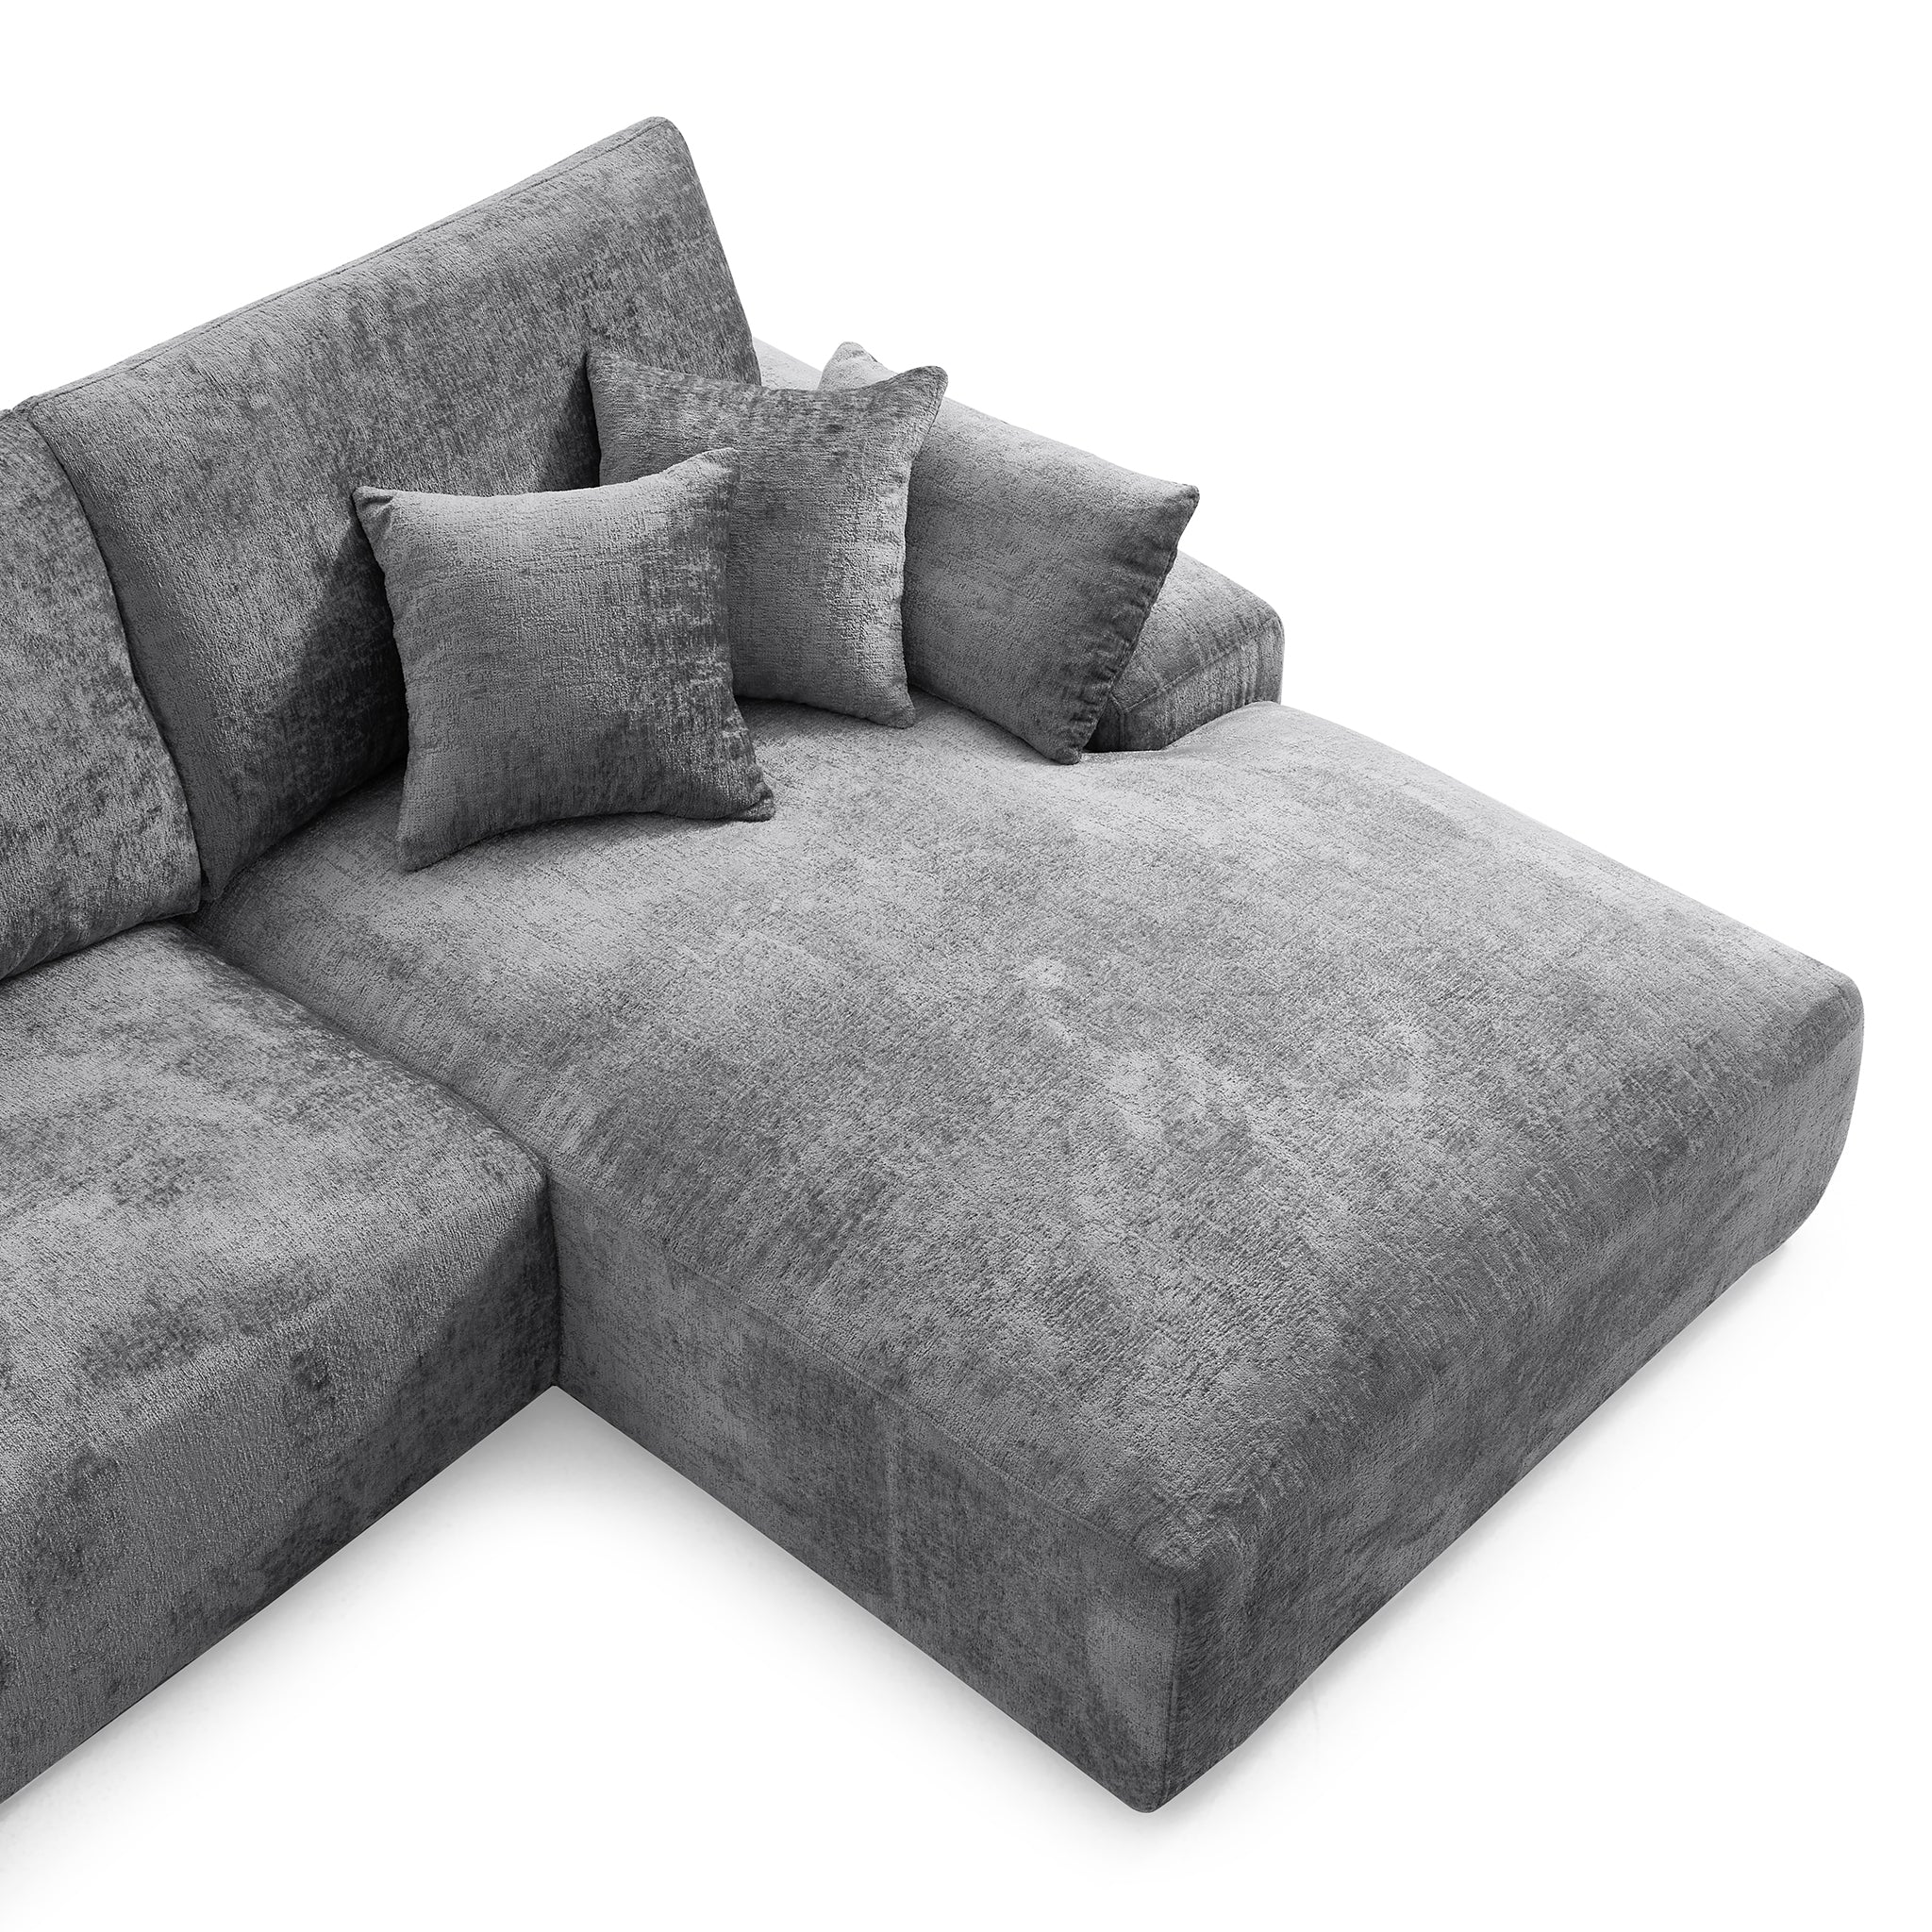 The Empress Gray Sectional